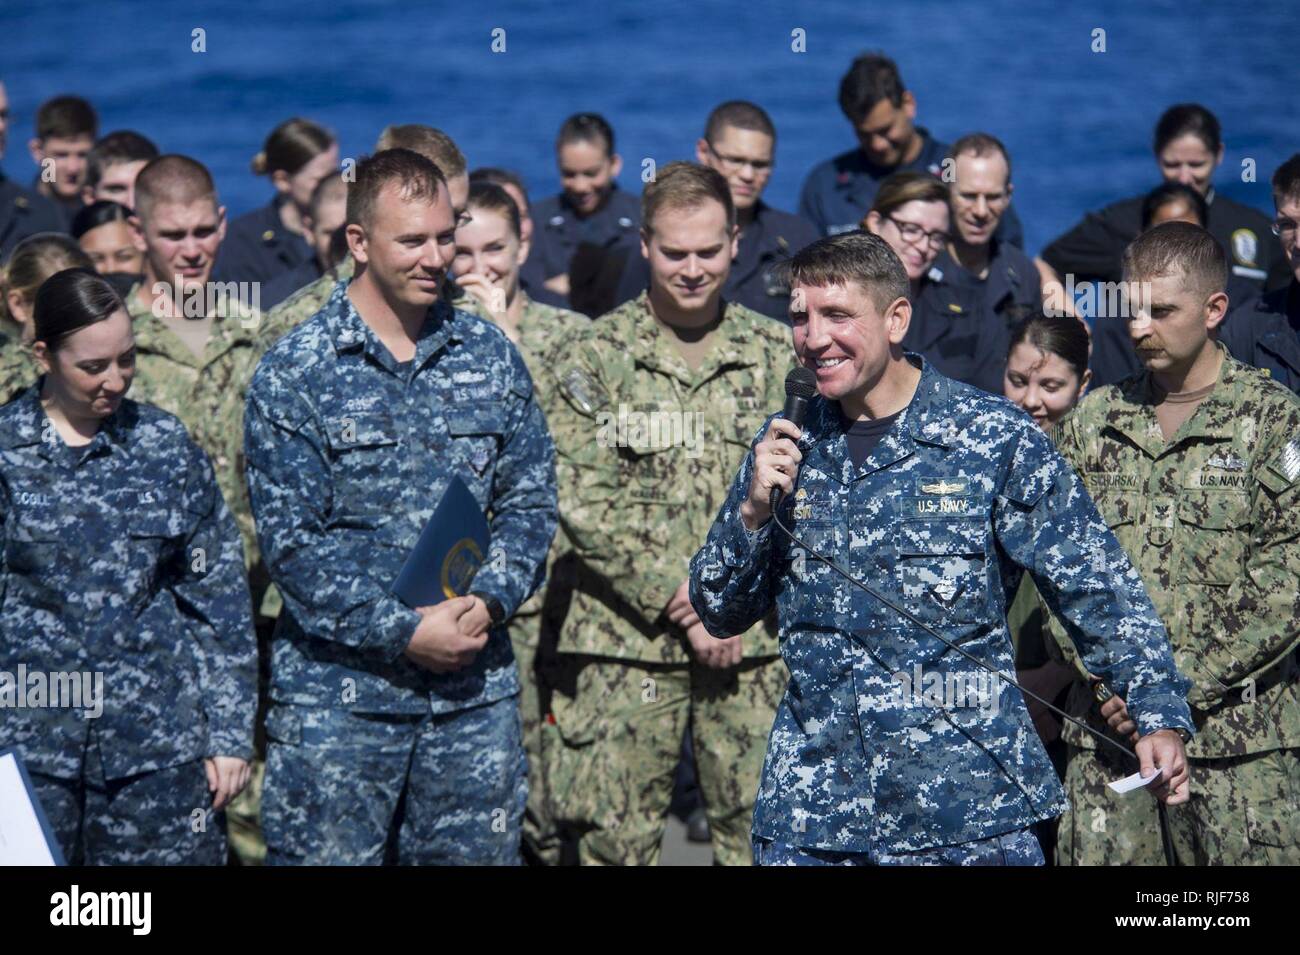 PACIFIC OCEAN (Feb. 12, 2015) – Cmdr. Scott T. Tasin, commanding officer of the dock landing ship USS Comstock (LSD 45), addresses Sailors during an all-hands call on the flight deck. Comstock, part of the Makin Island Amphibious Ready Group, and the embarked 11th Marine Expeditionary Unit are returning to homeport San Diego following a seven-month deployment to the Western Pacific and the U.S. Central Command areas of operation. Stock Photo